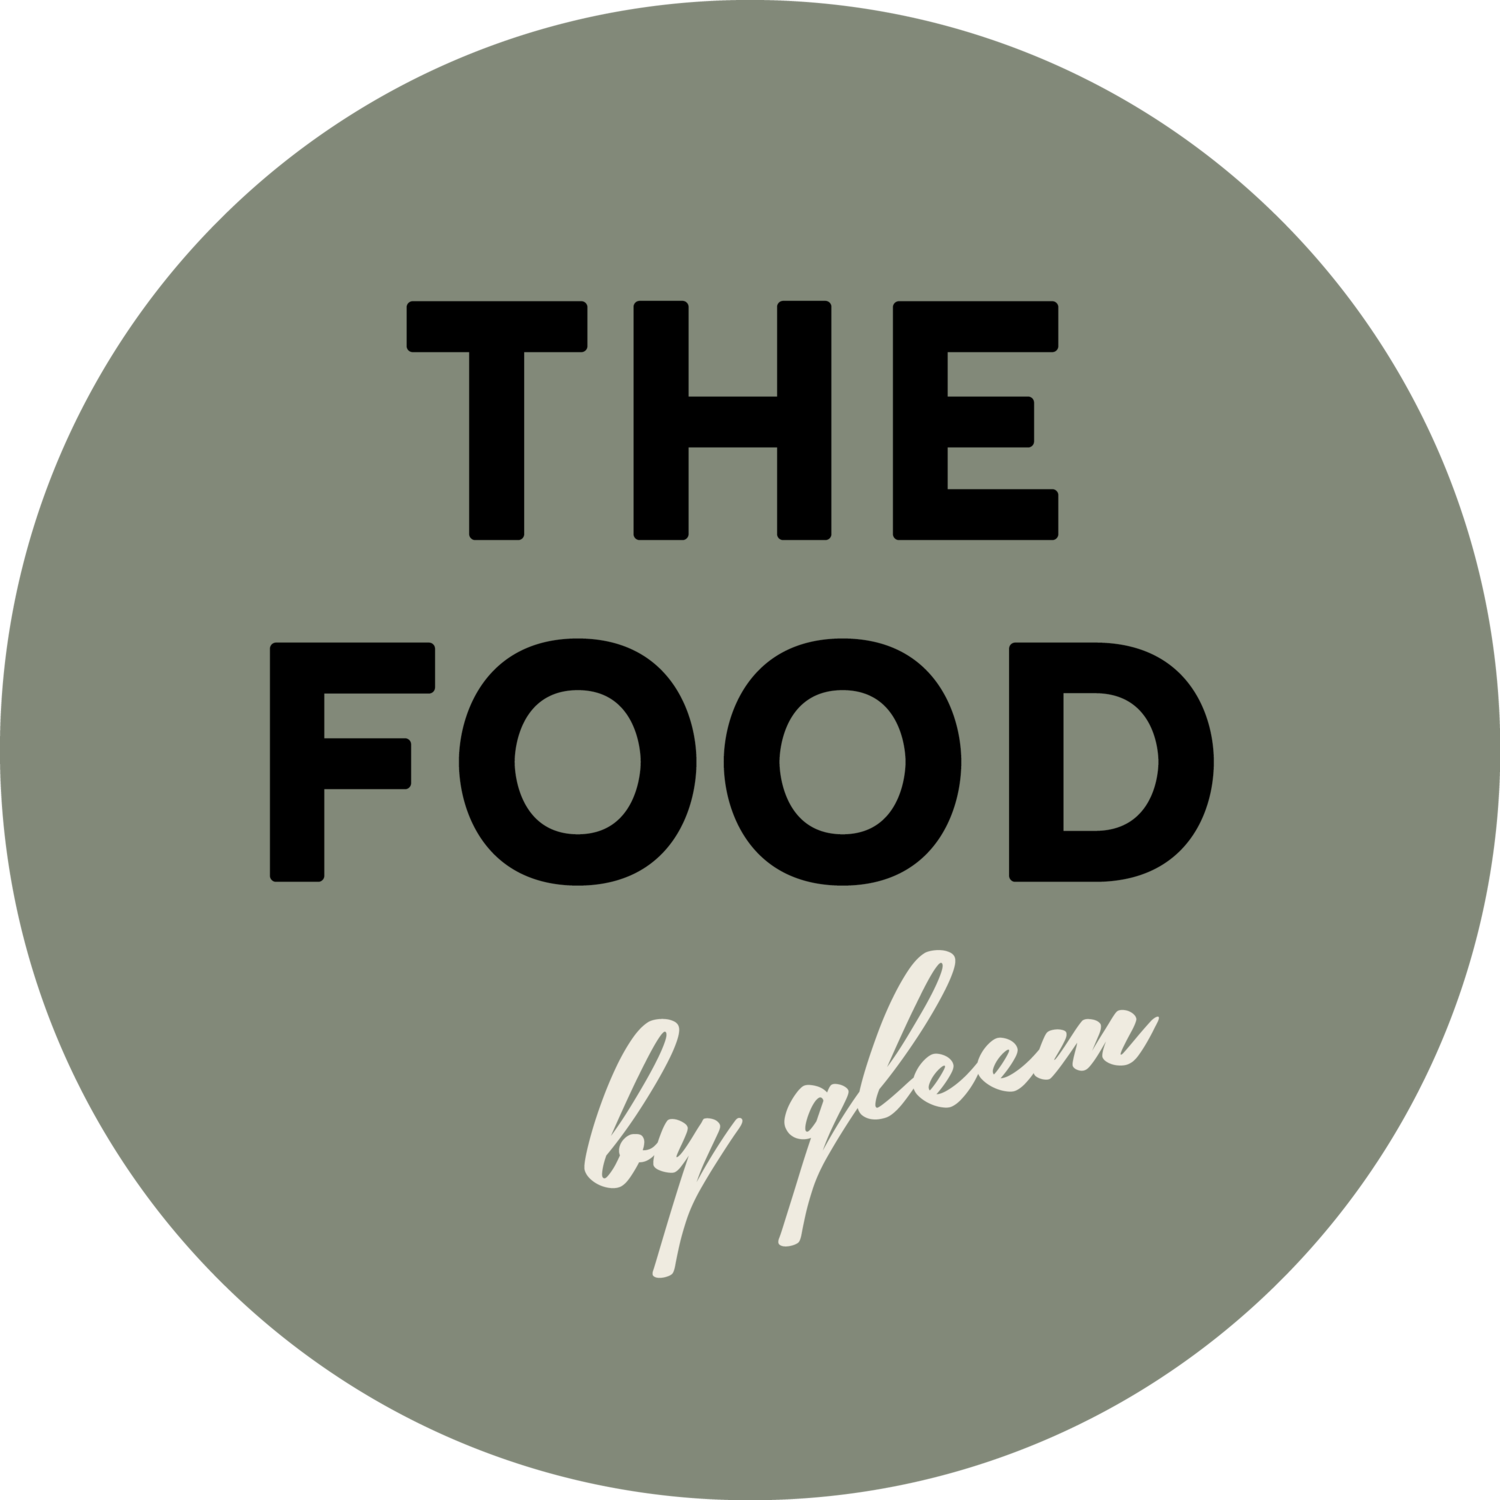  THE FOOD